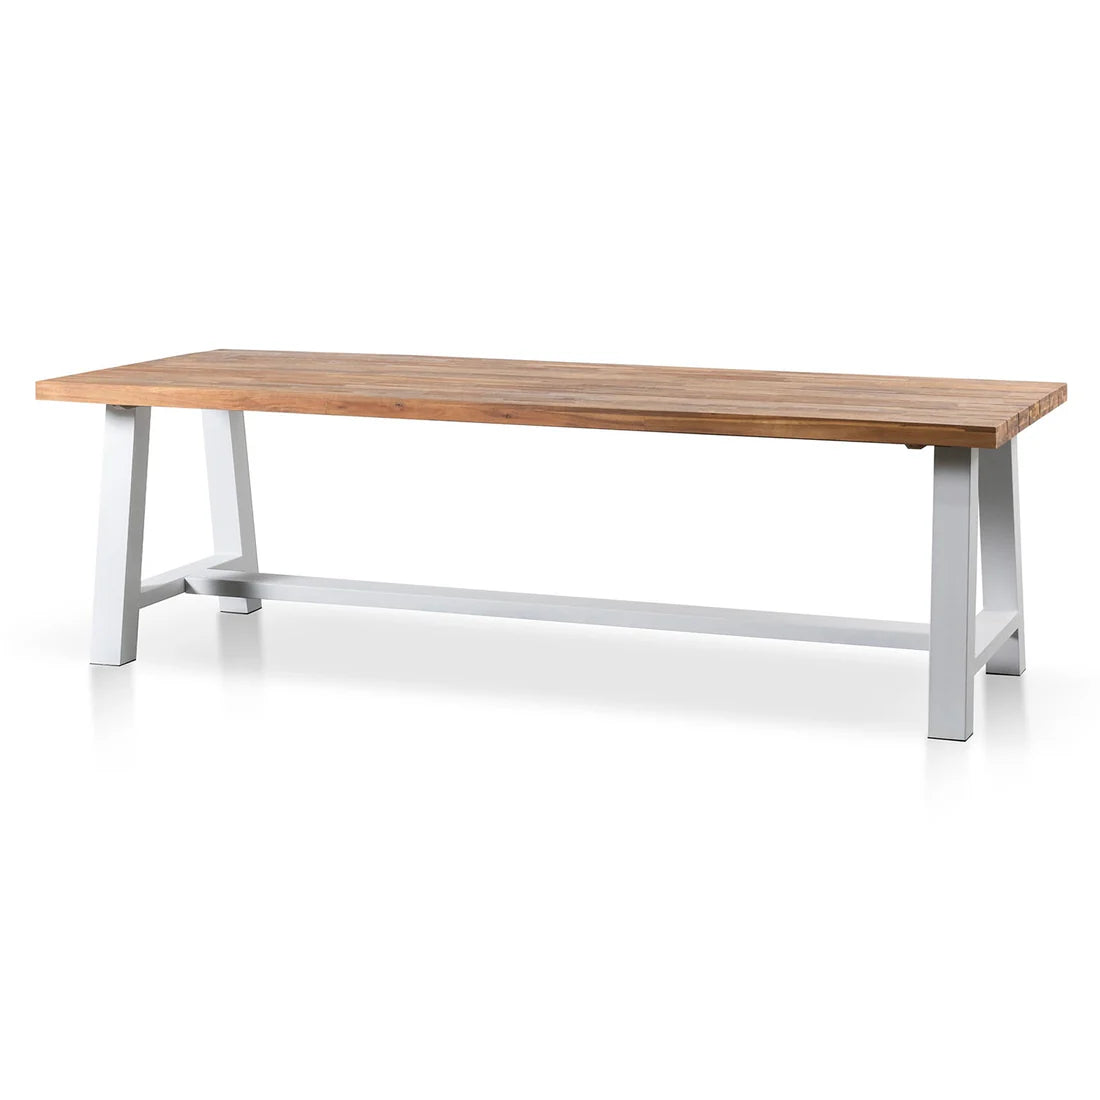 Irving | 2.5m Rectangular Natural Wooden Outdoor Dining Table